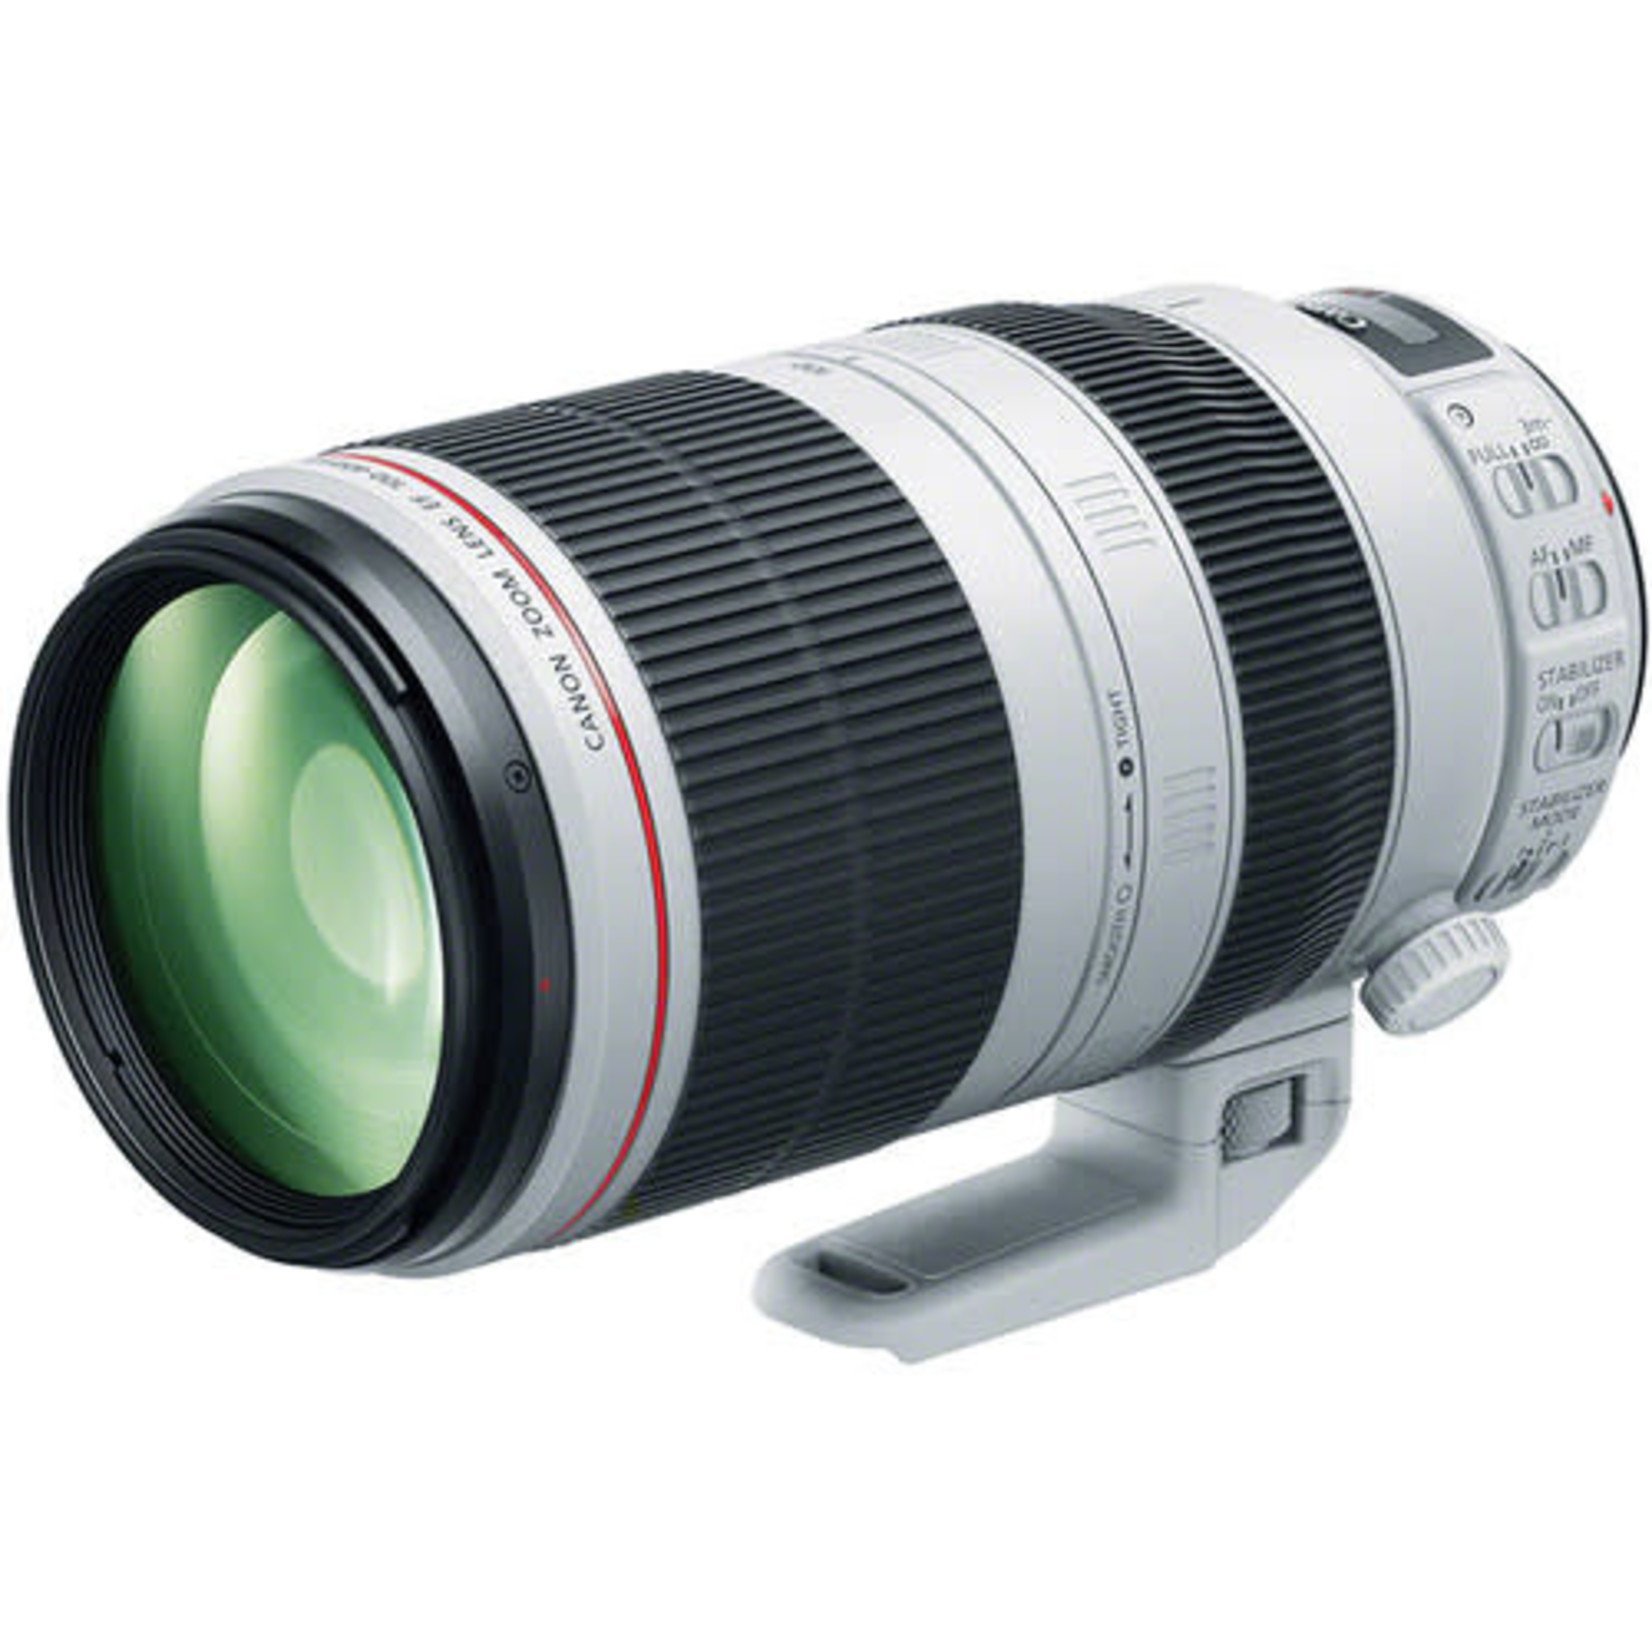 Canon Canon EF 100-400mm f/4.5-5.6L IS II USM Lens